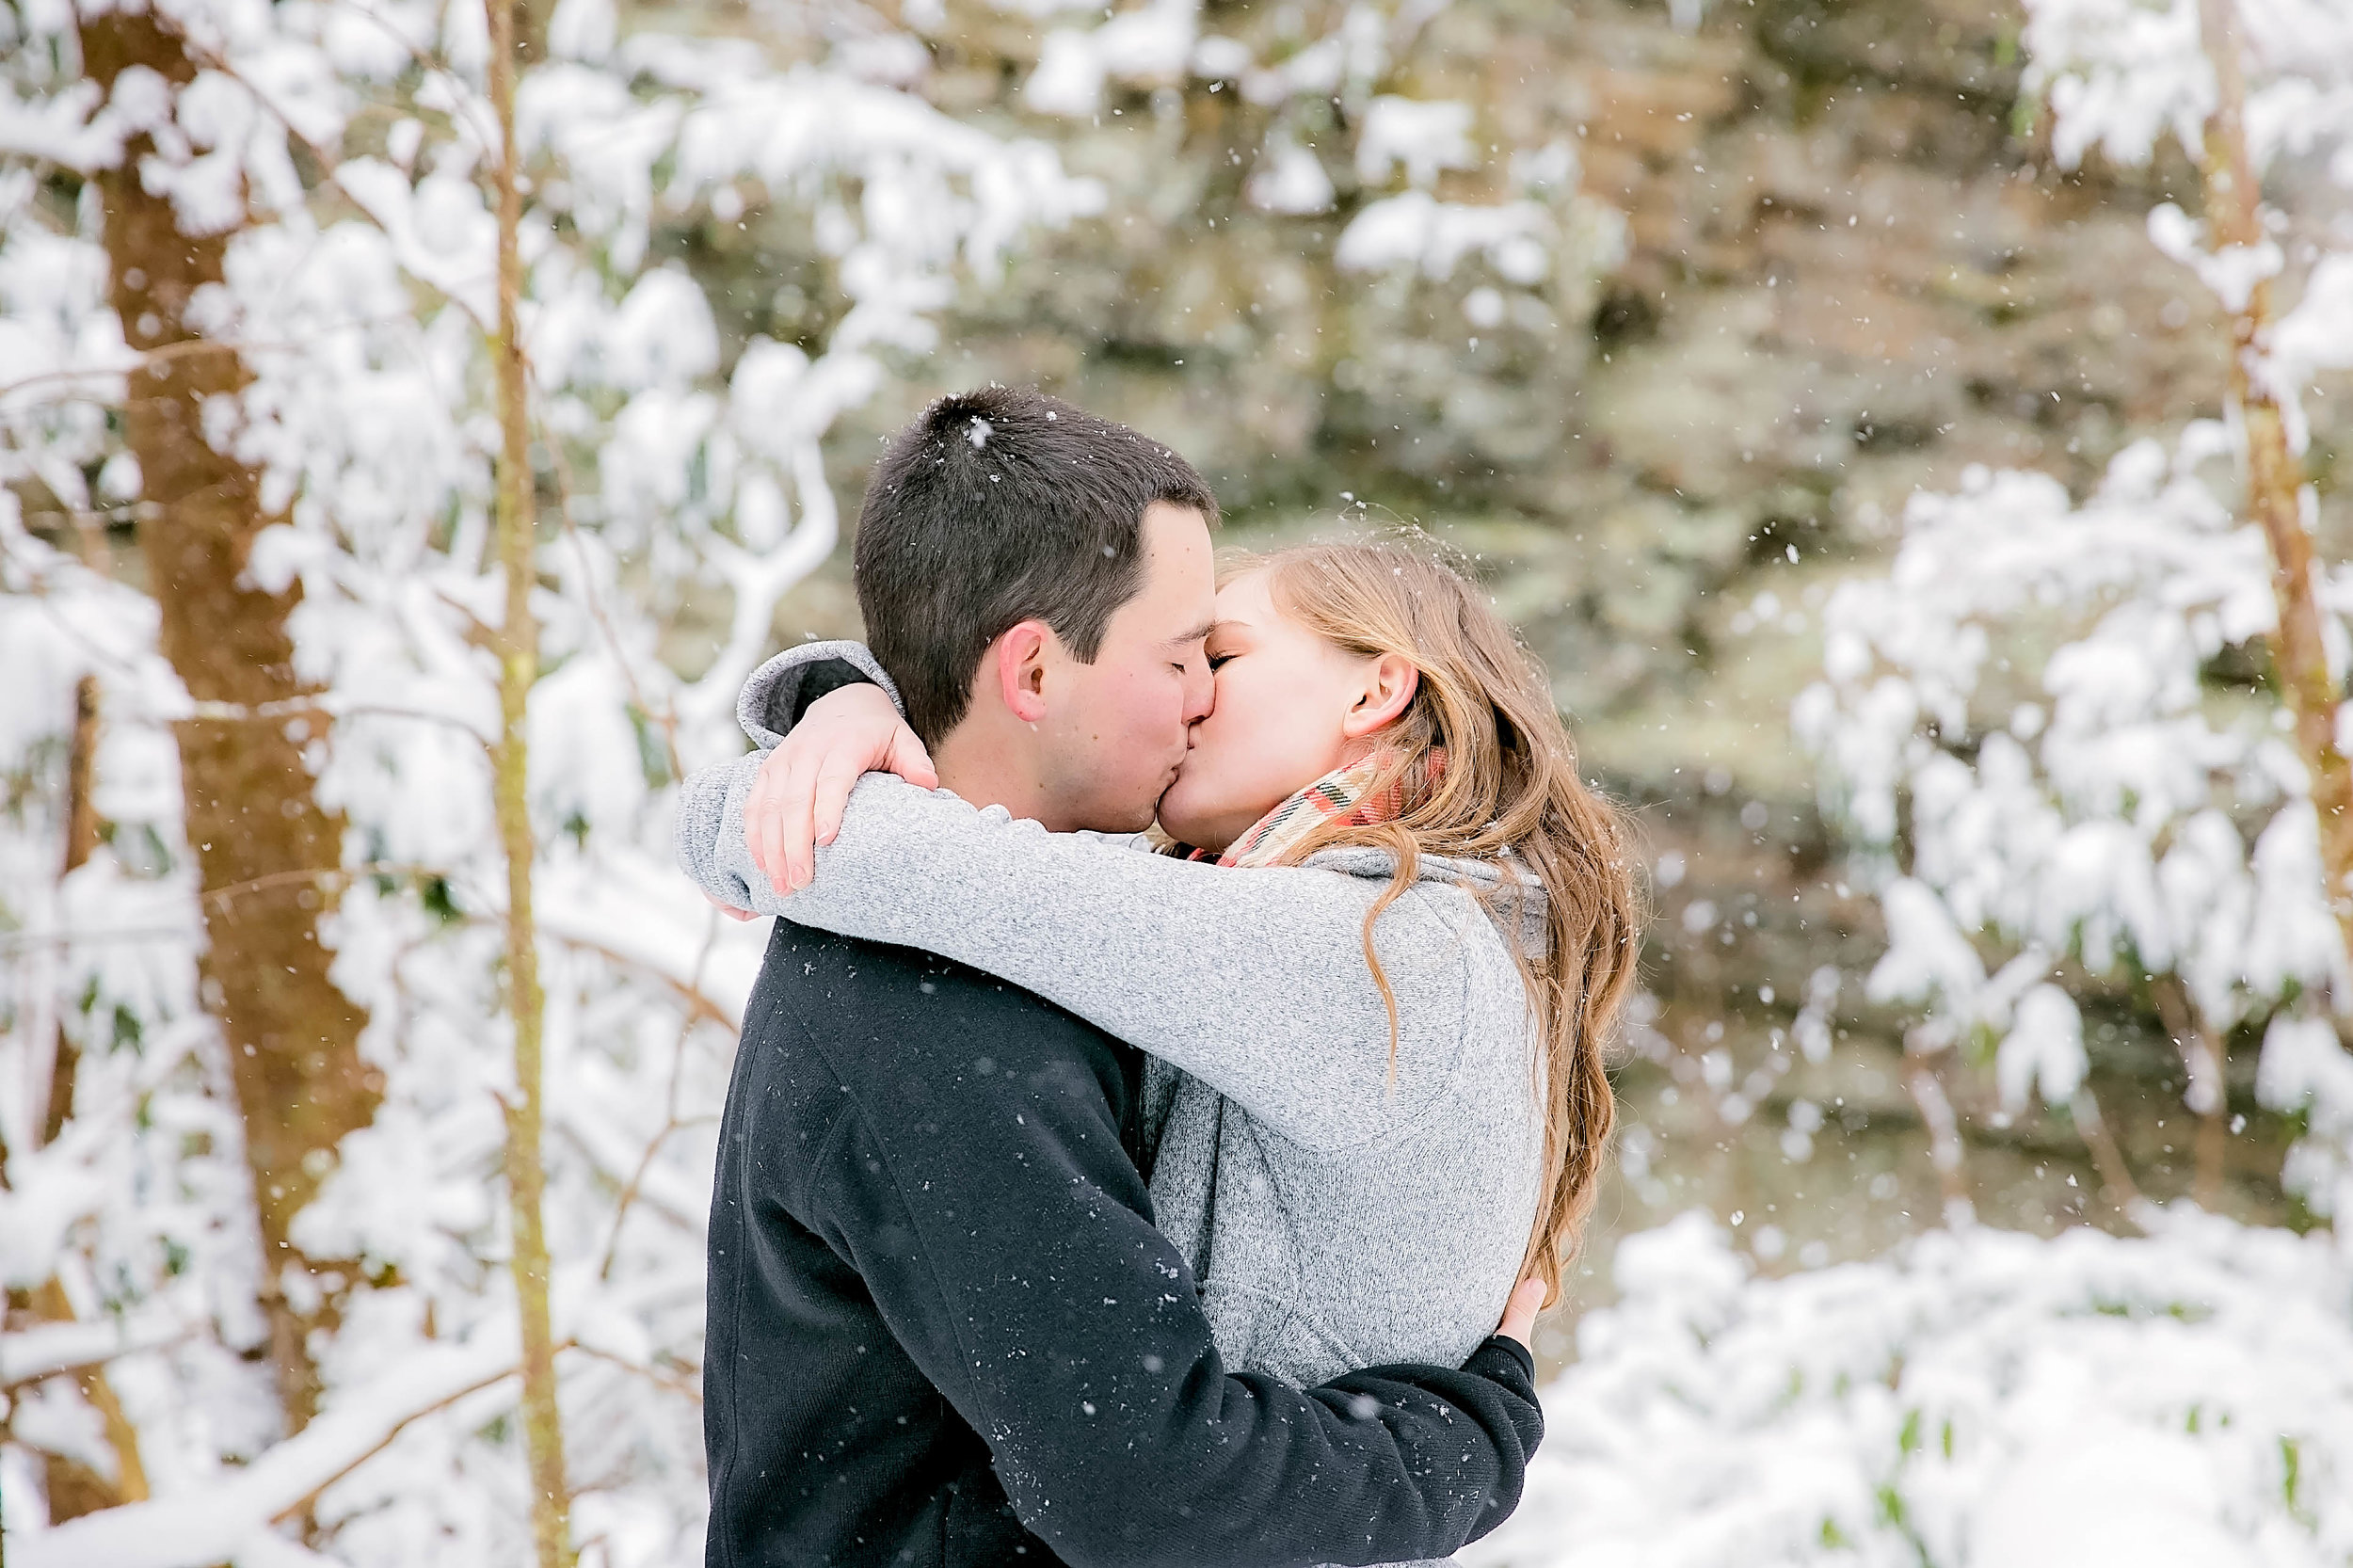 Laurel Falls hiking trail engagement session, romantic hike, East Tennessee snow engagement picture, Tri Cities wedding photography, Johnson City, TN photography, romantic couple in the snow